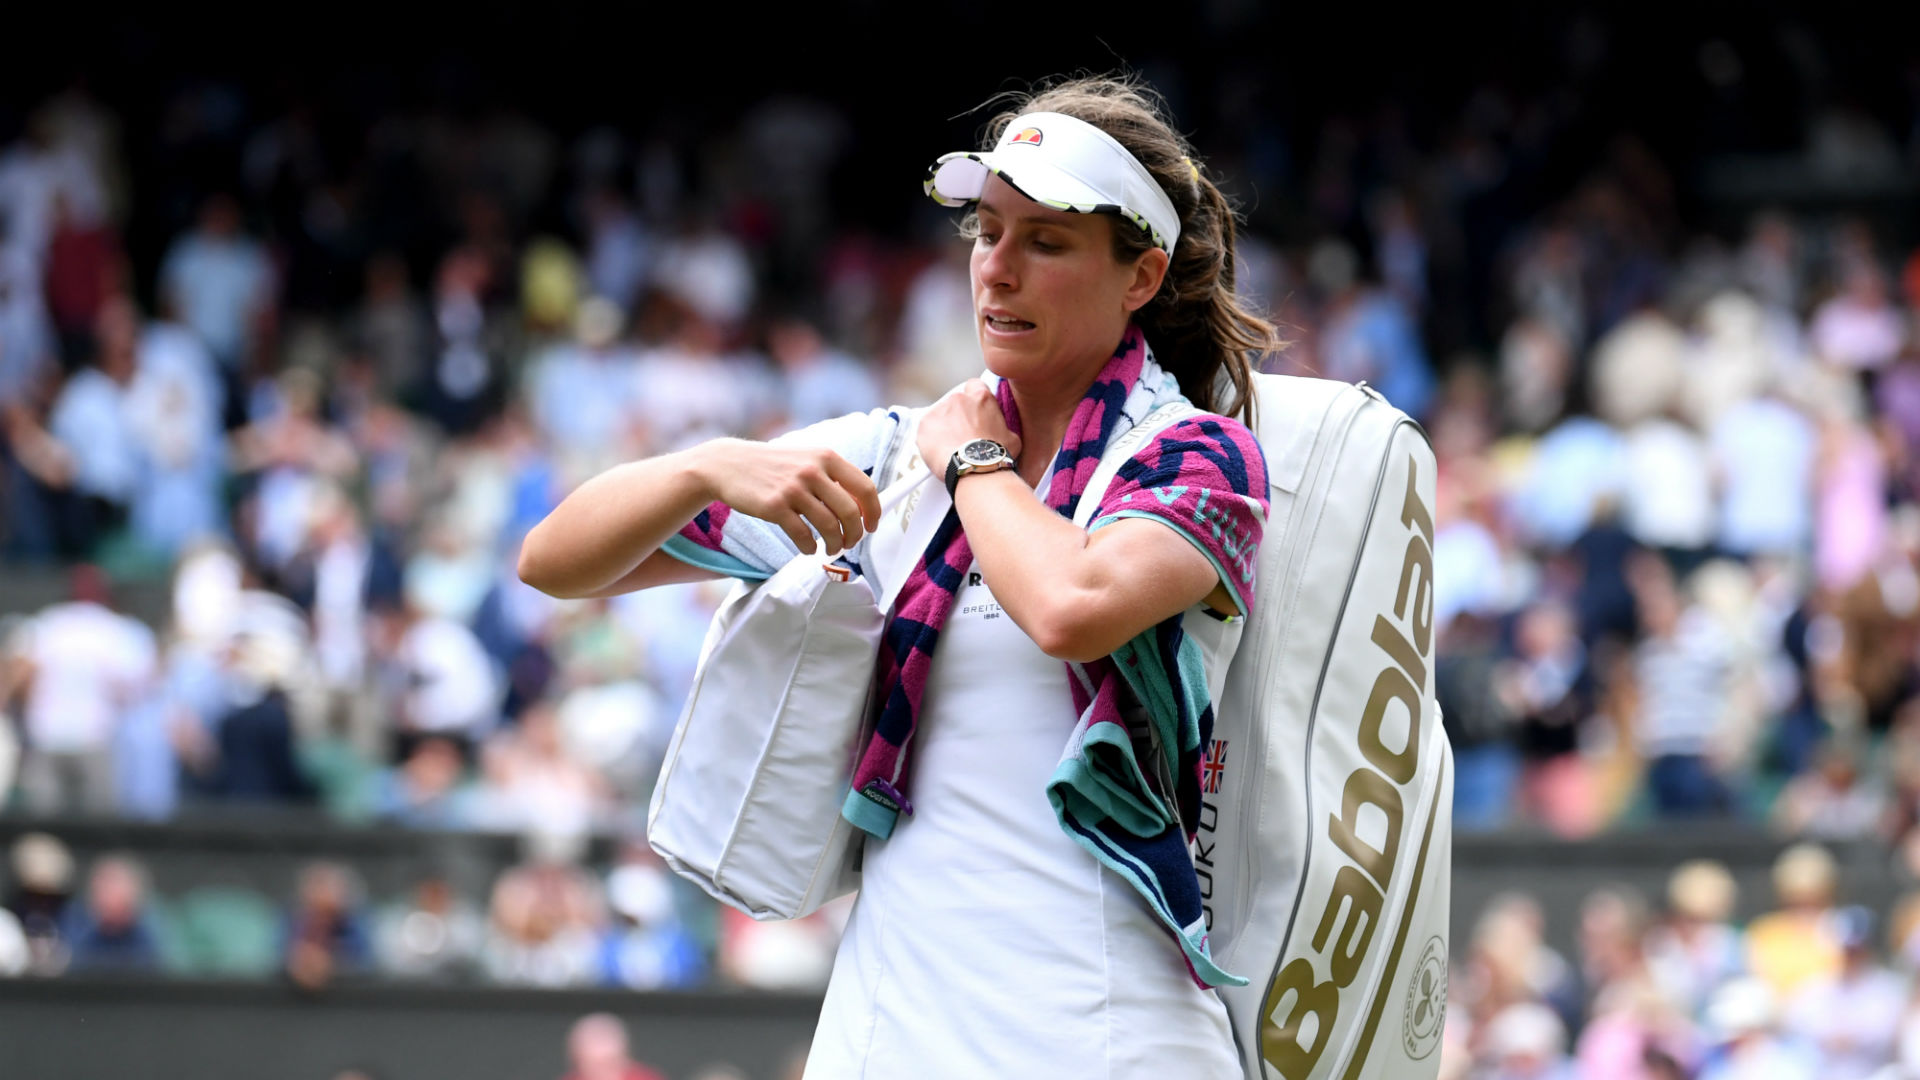 After suffering a surprise defeat to Barbora Strycova, Johanna Konta was frustrated by a question she believed was "patronising".